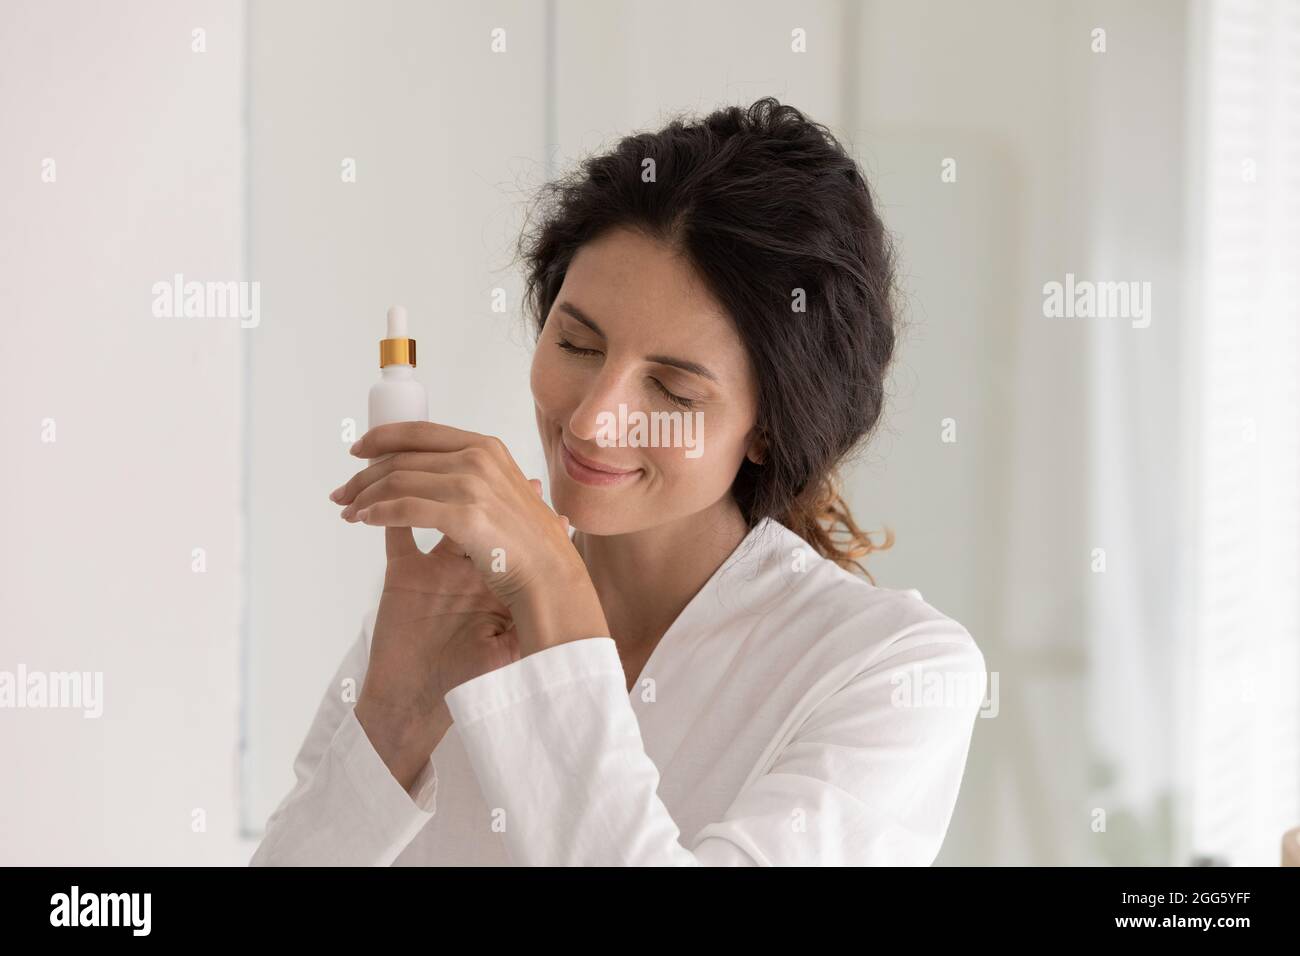 Peaceful happy young woman applying oil perfume on hands. Stock Photo